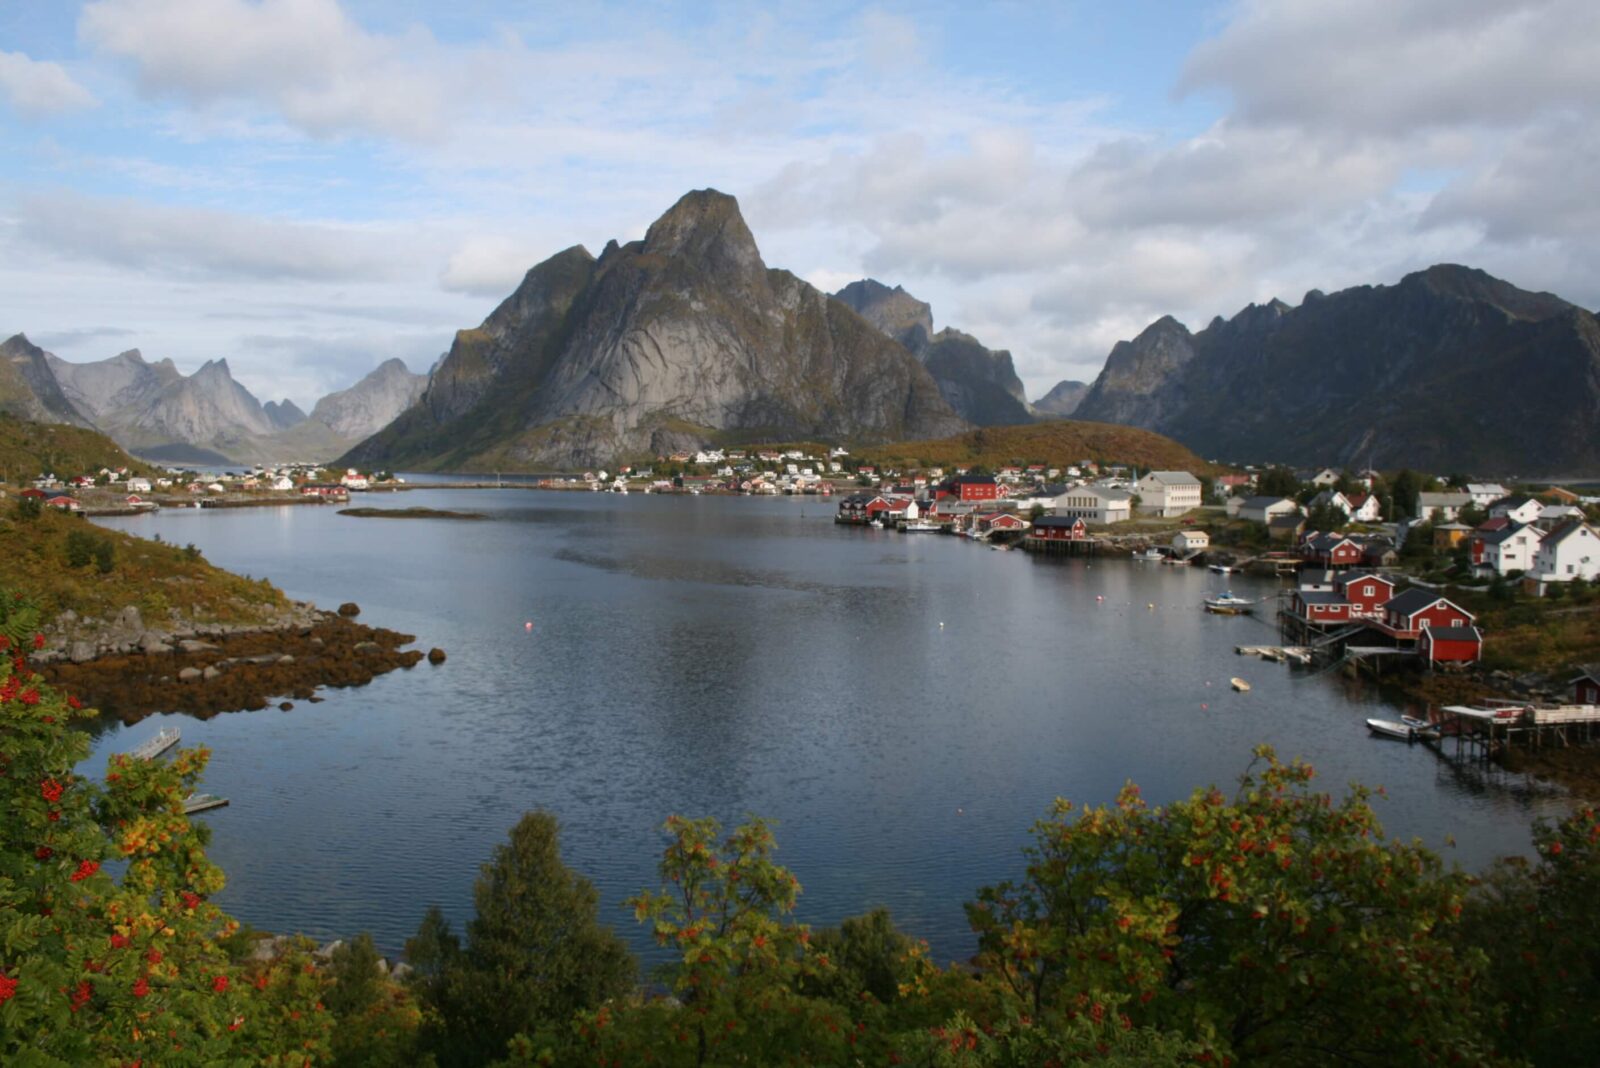 View of the Lofoten Islands, one of the most beautiful places in Norway